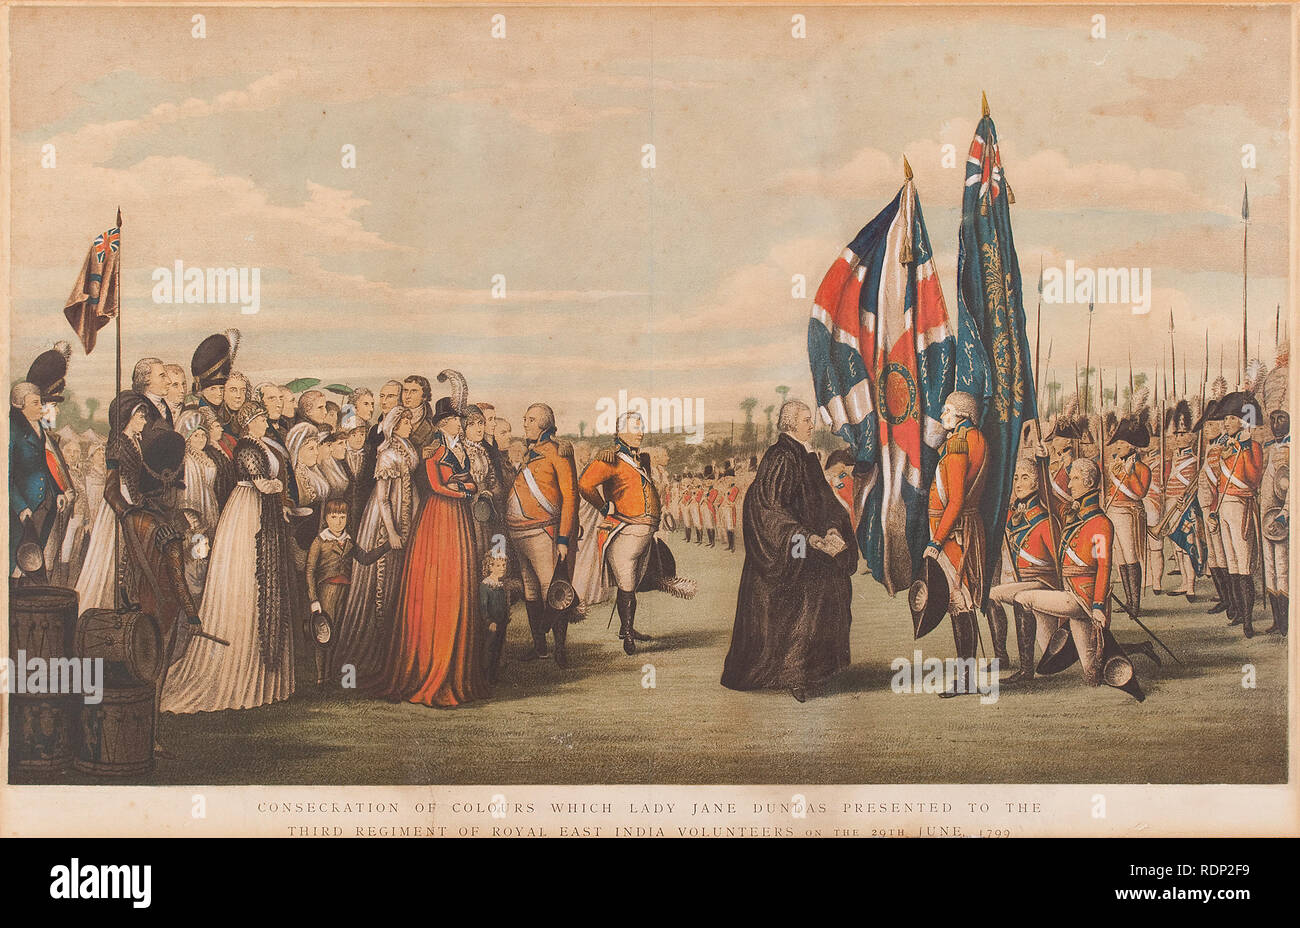 A print of Consecration of Colours Which Lady Jane Dundas Presented To The Third Regiment of Royal East India Volunteers. 29th June 1799 Stock Photo